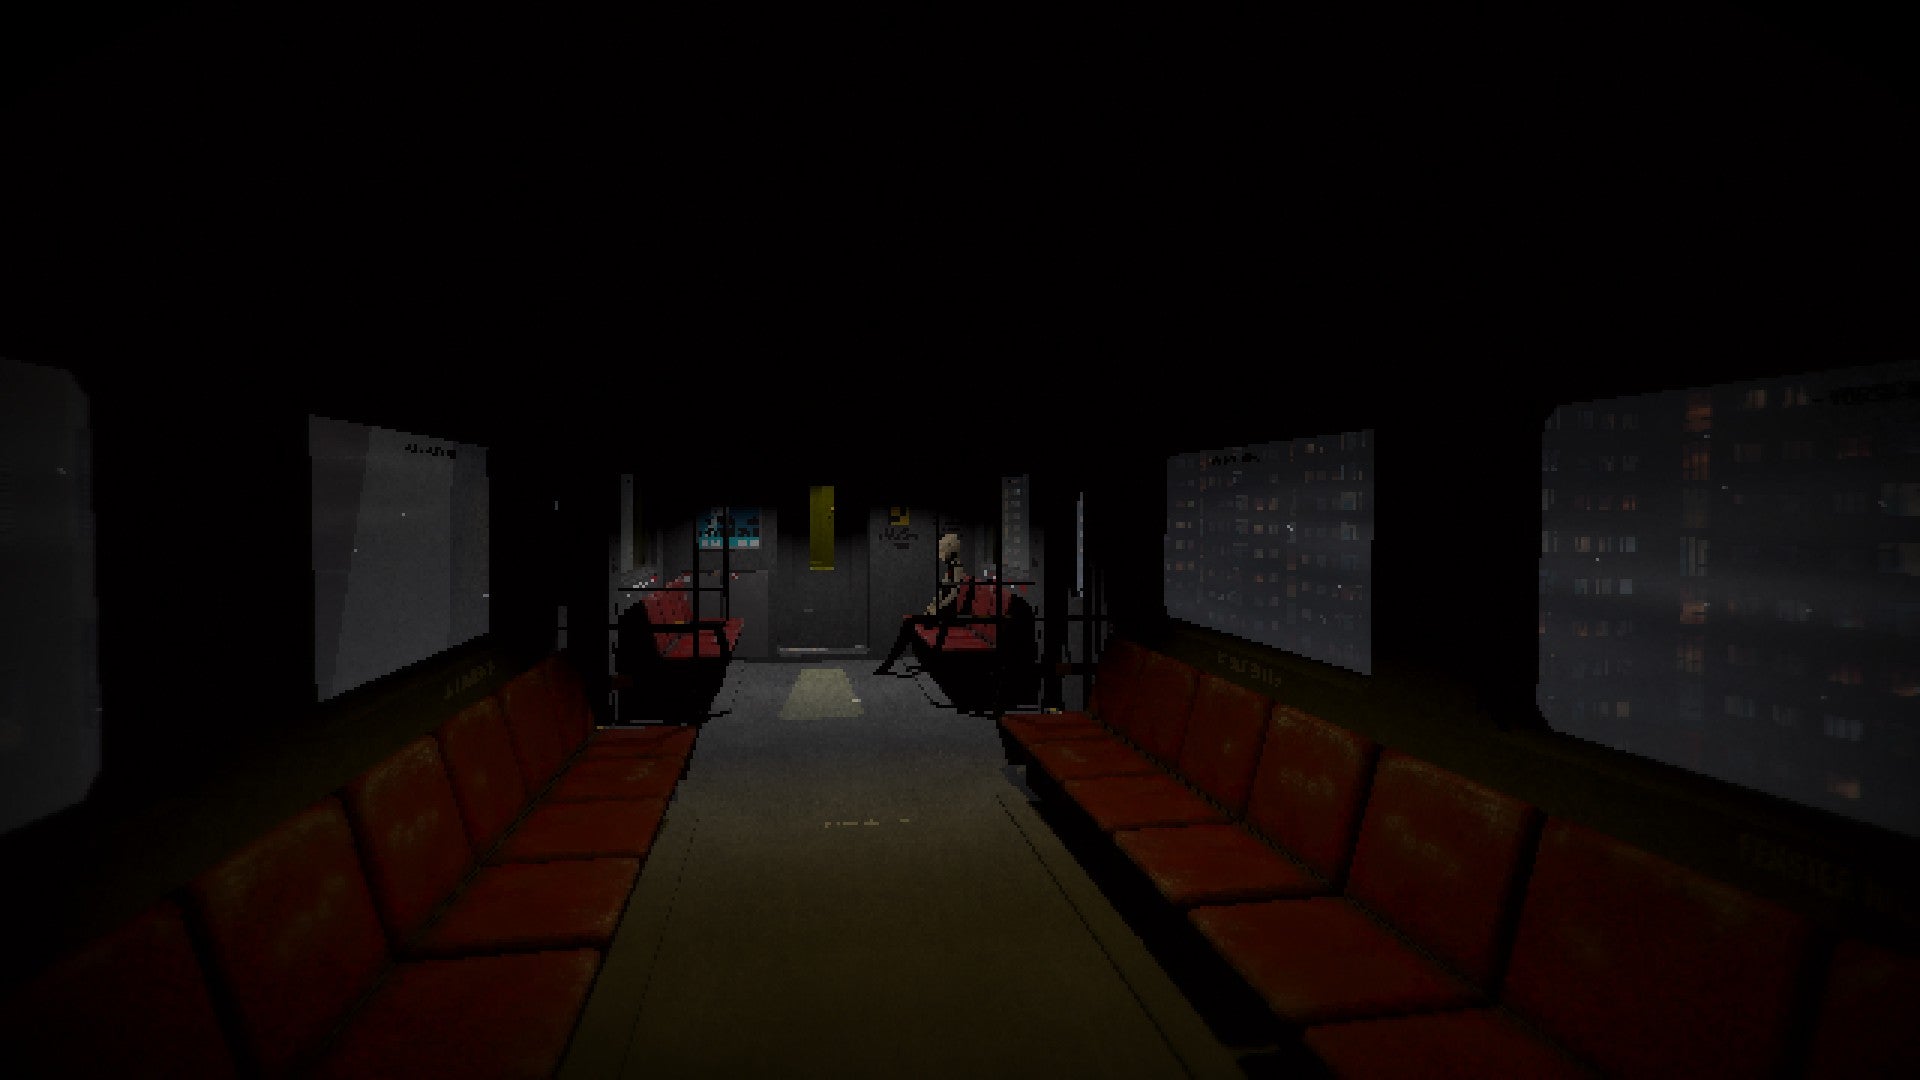 Signalis review - a very dark, futuristic train carriage with faded red seats and one character sat alone at the end, skyscrapers outside.